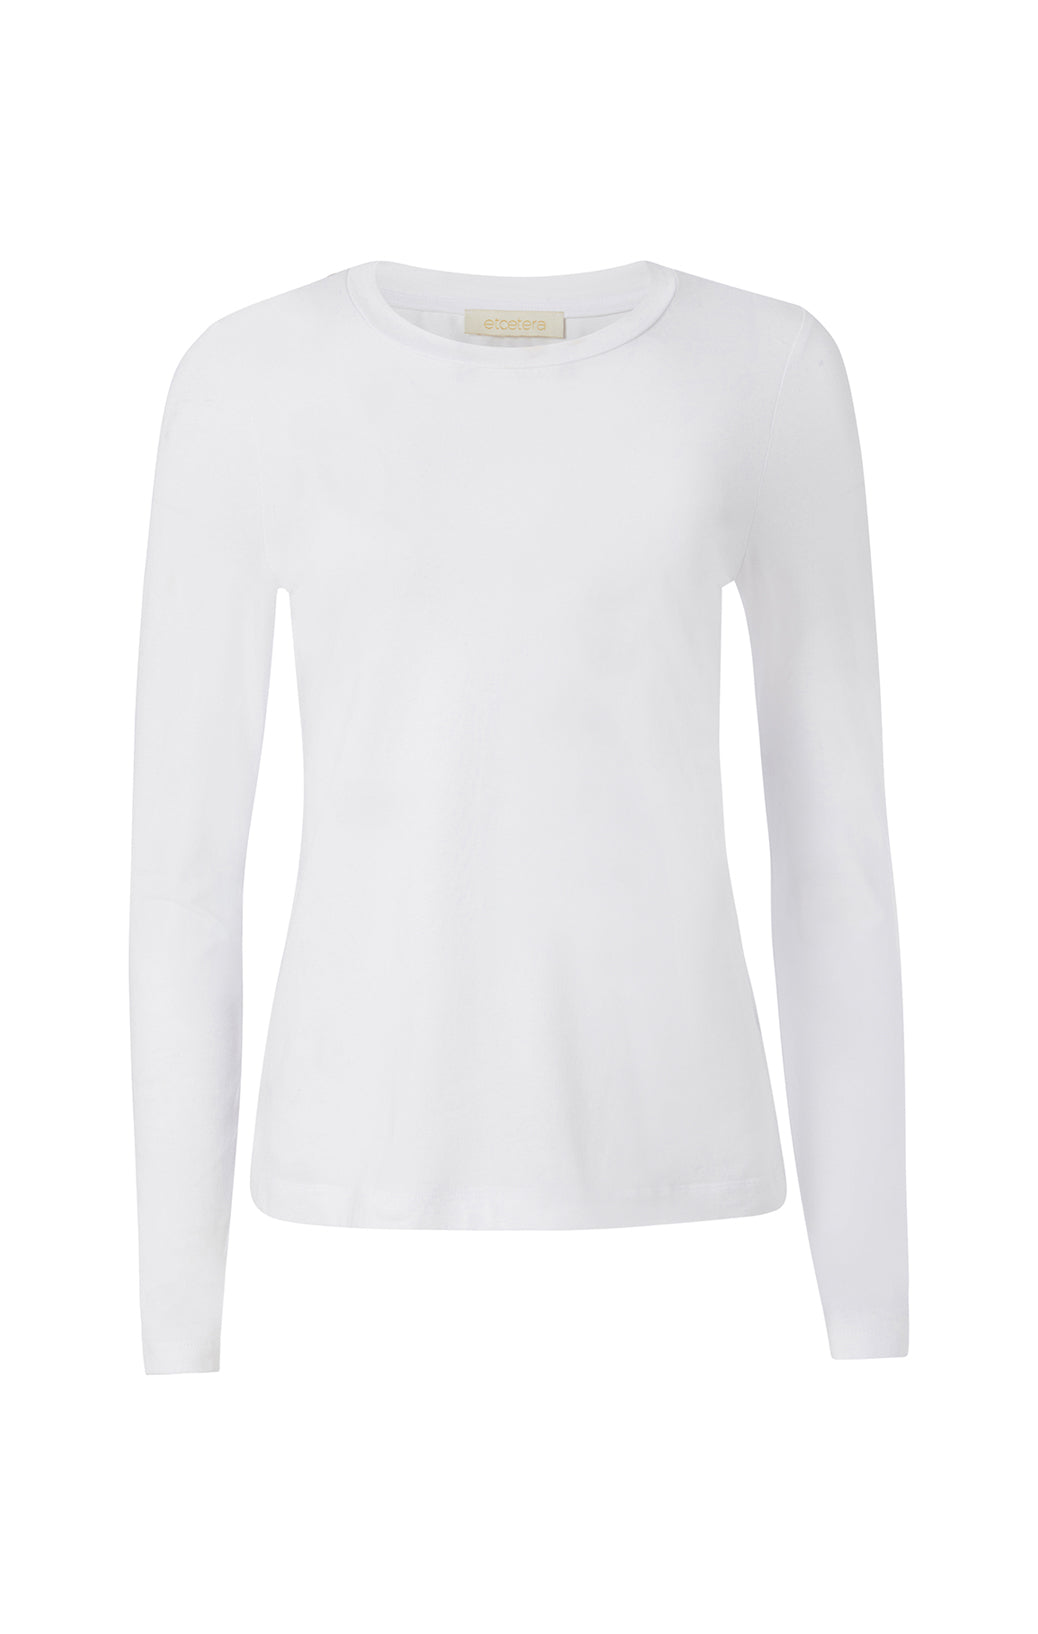 Clever-Nvy - Long-Sleeve Jersey Top